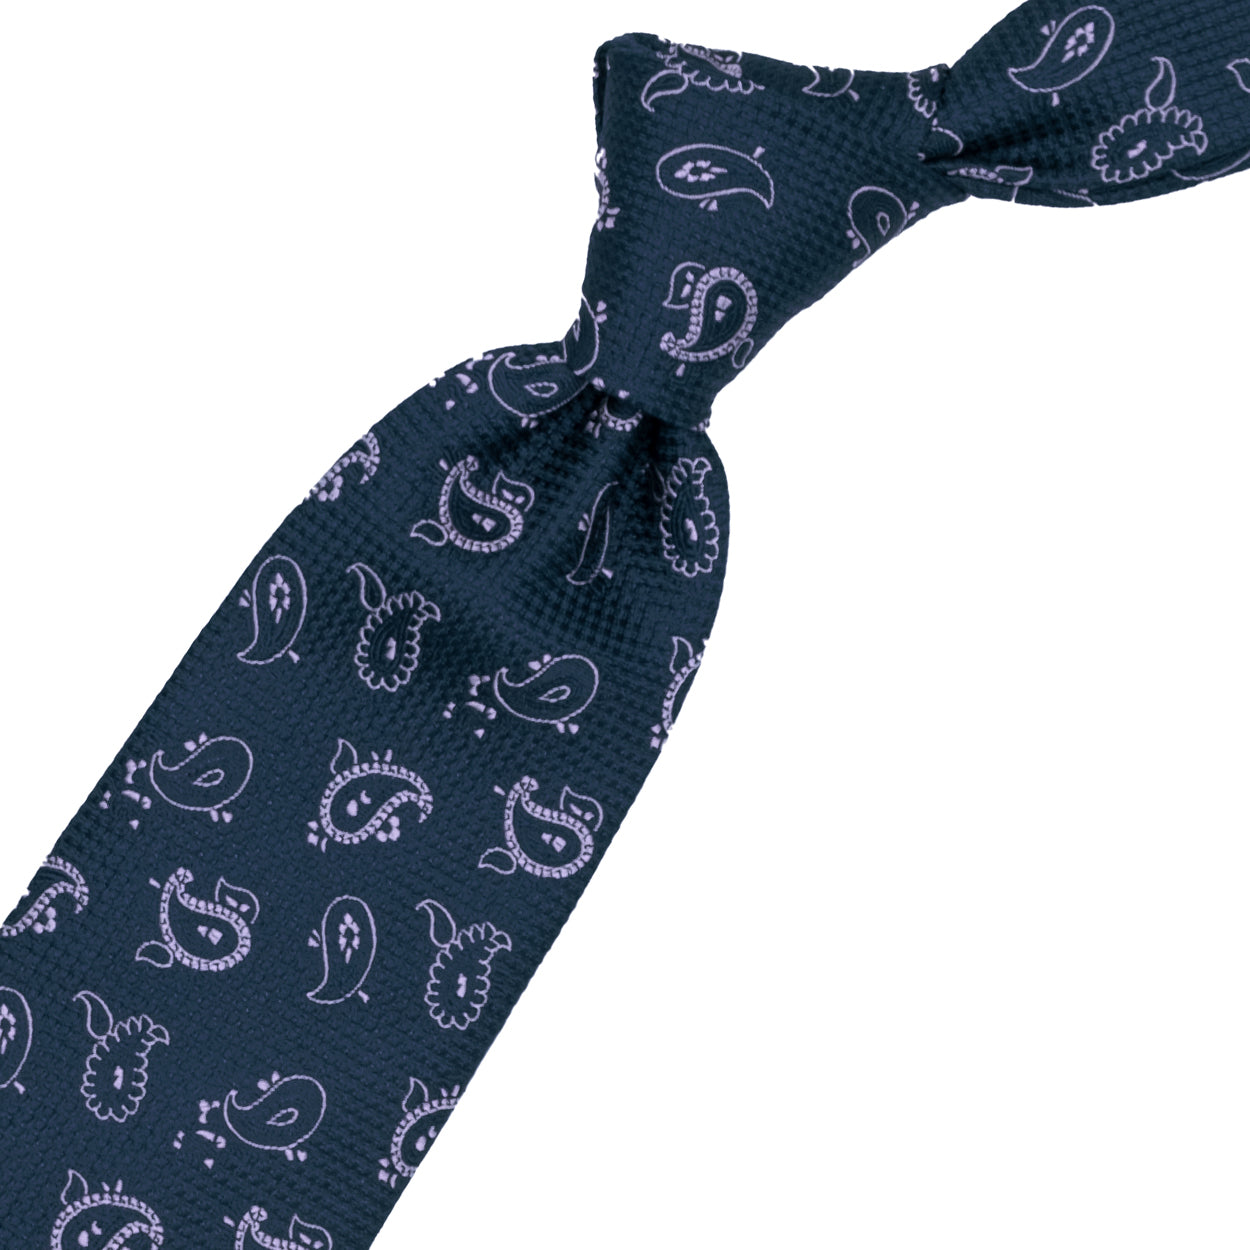 Blue tie with pink paisley